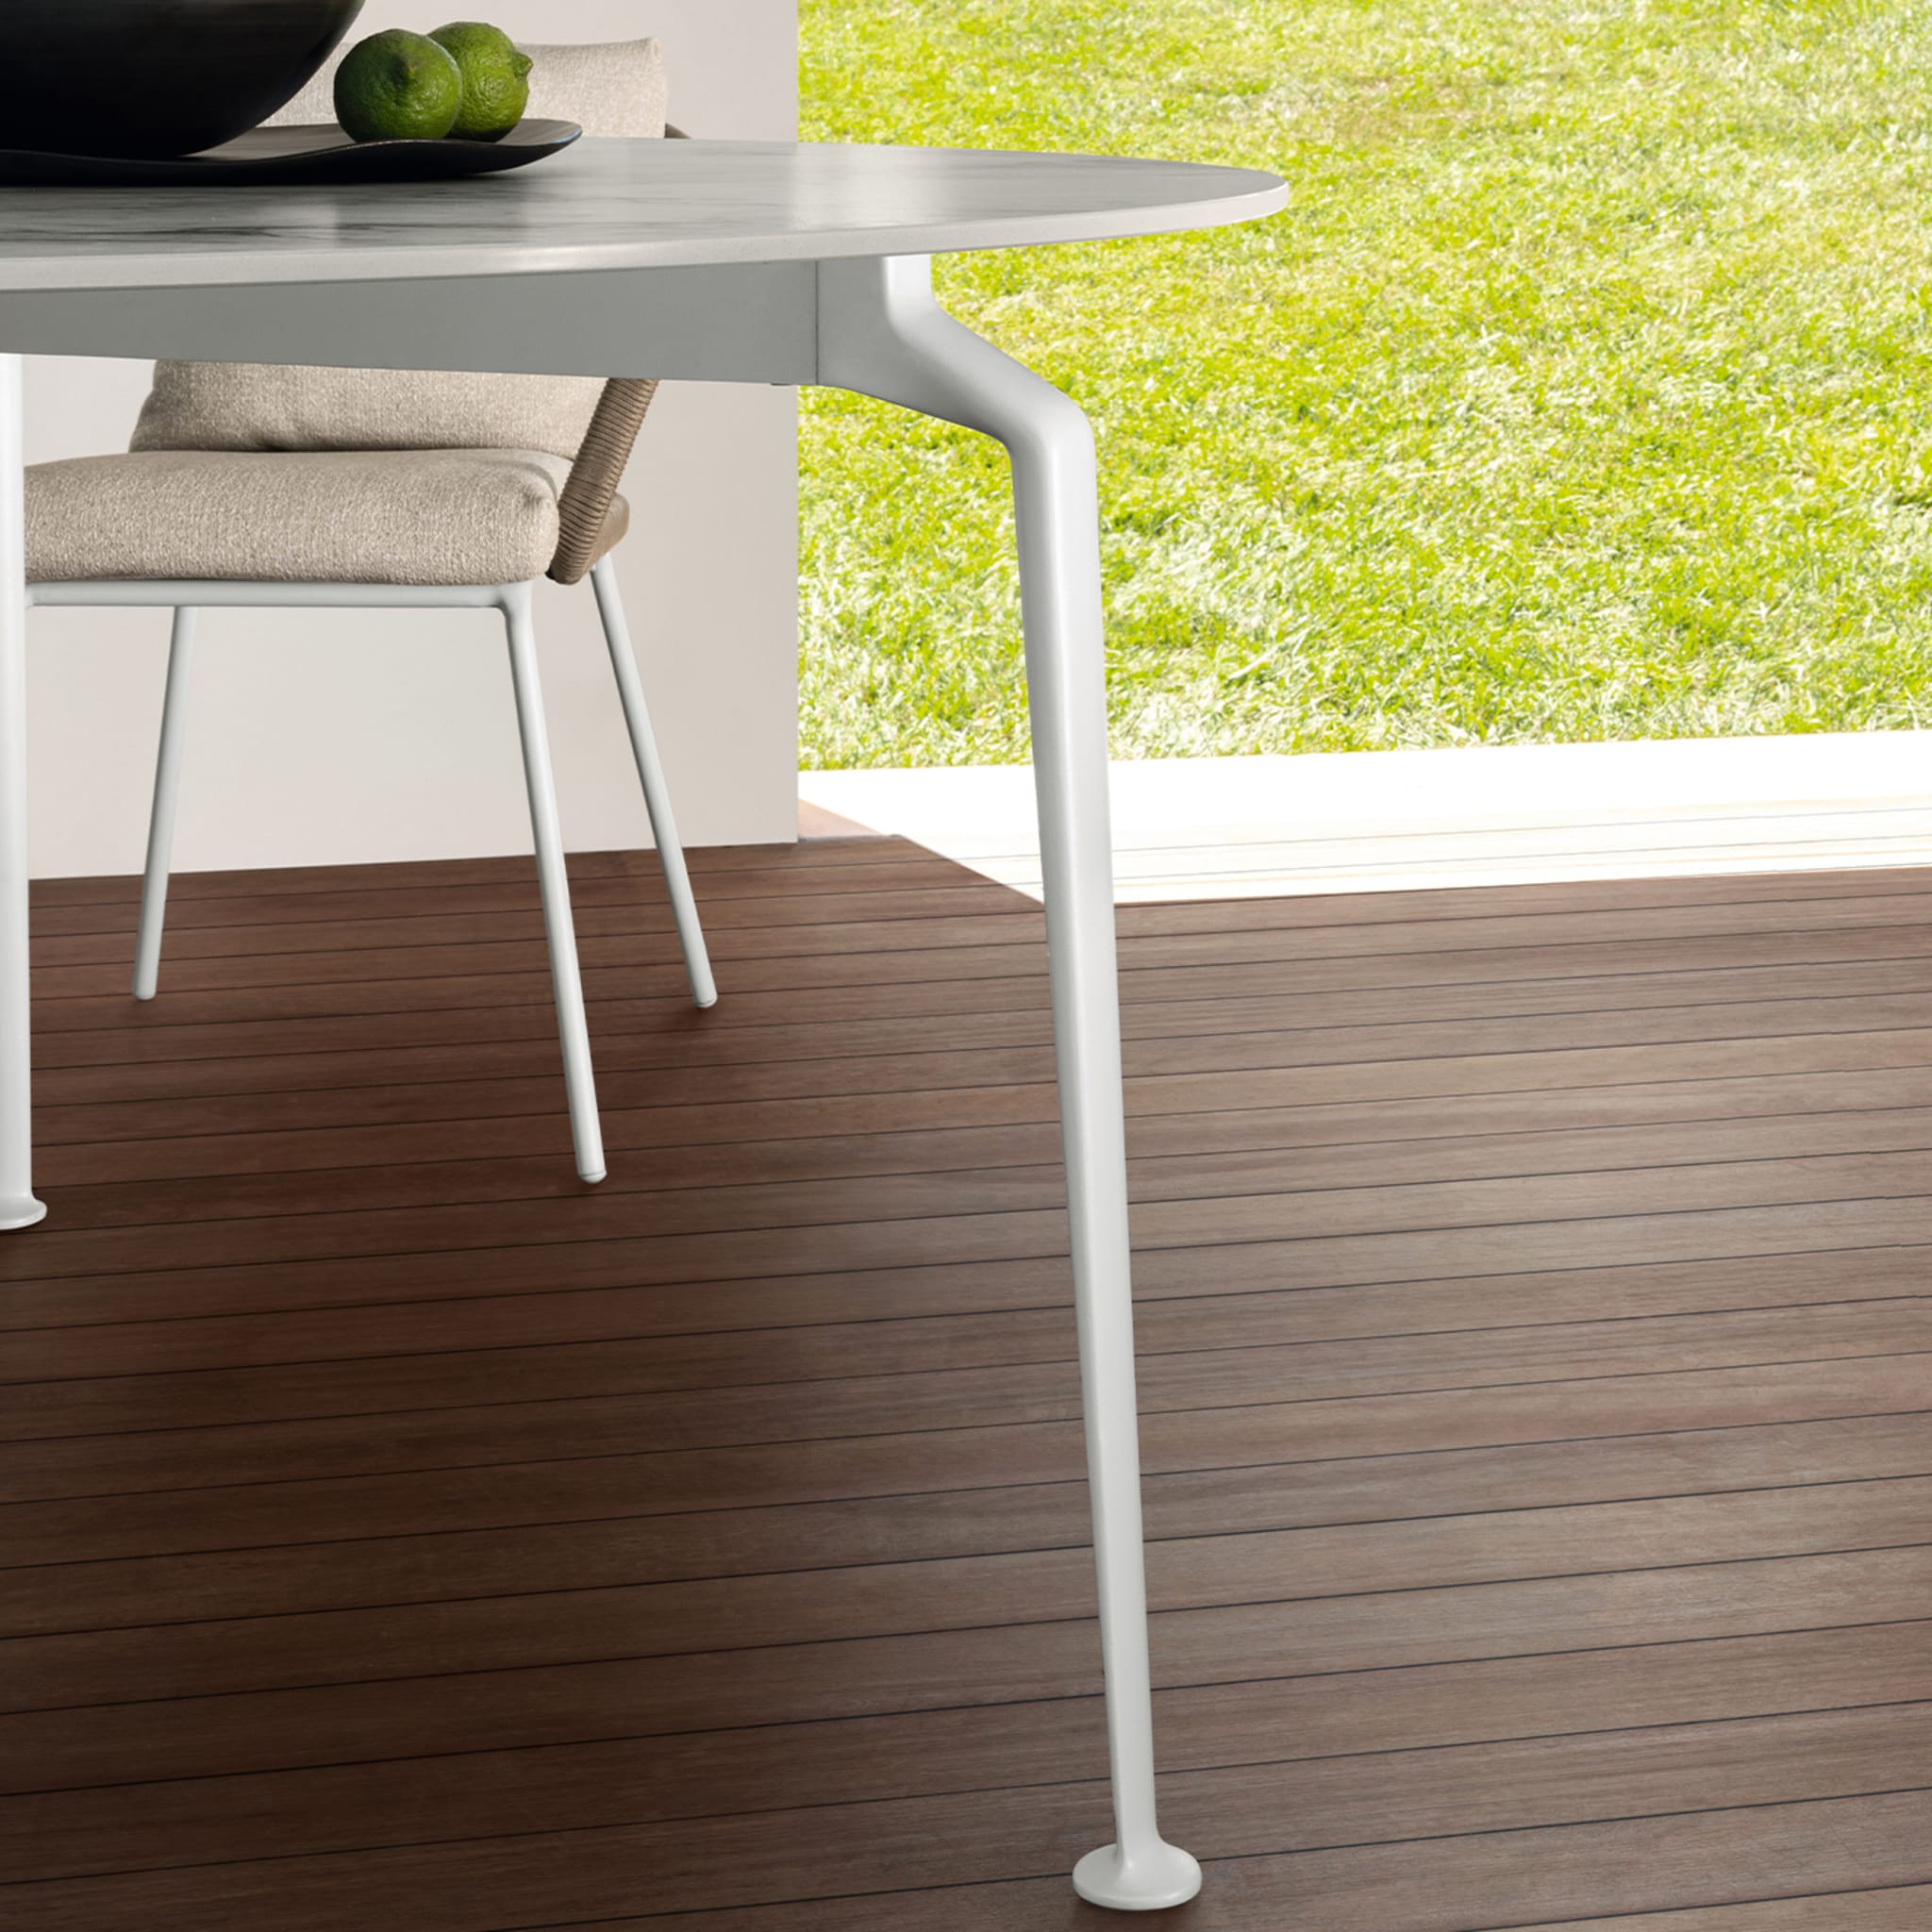 Cruise Alu White Dining Table by Ludovica & Roberto Palomba - Alternative view 1